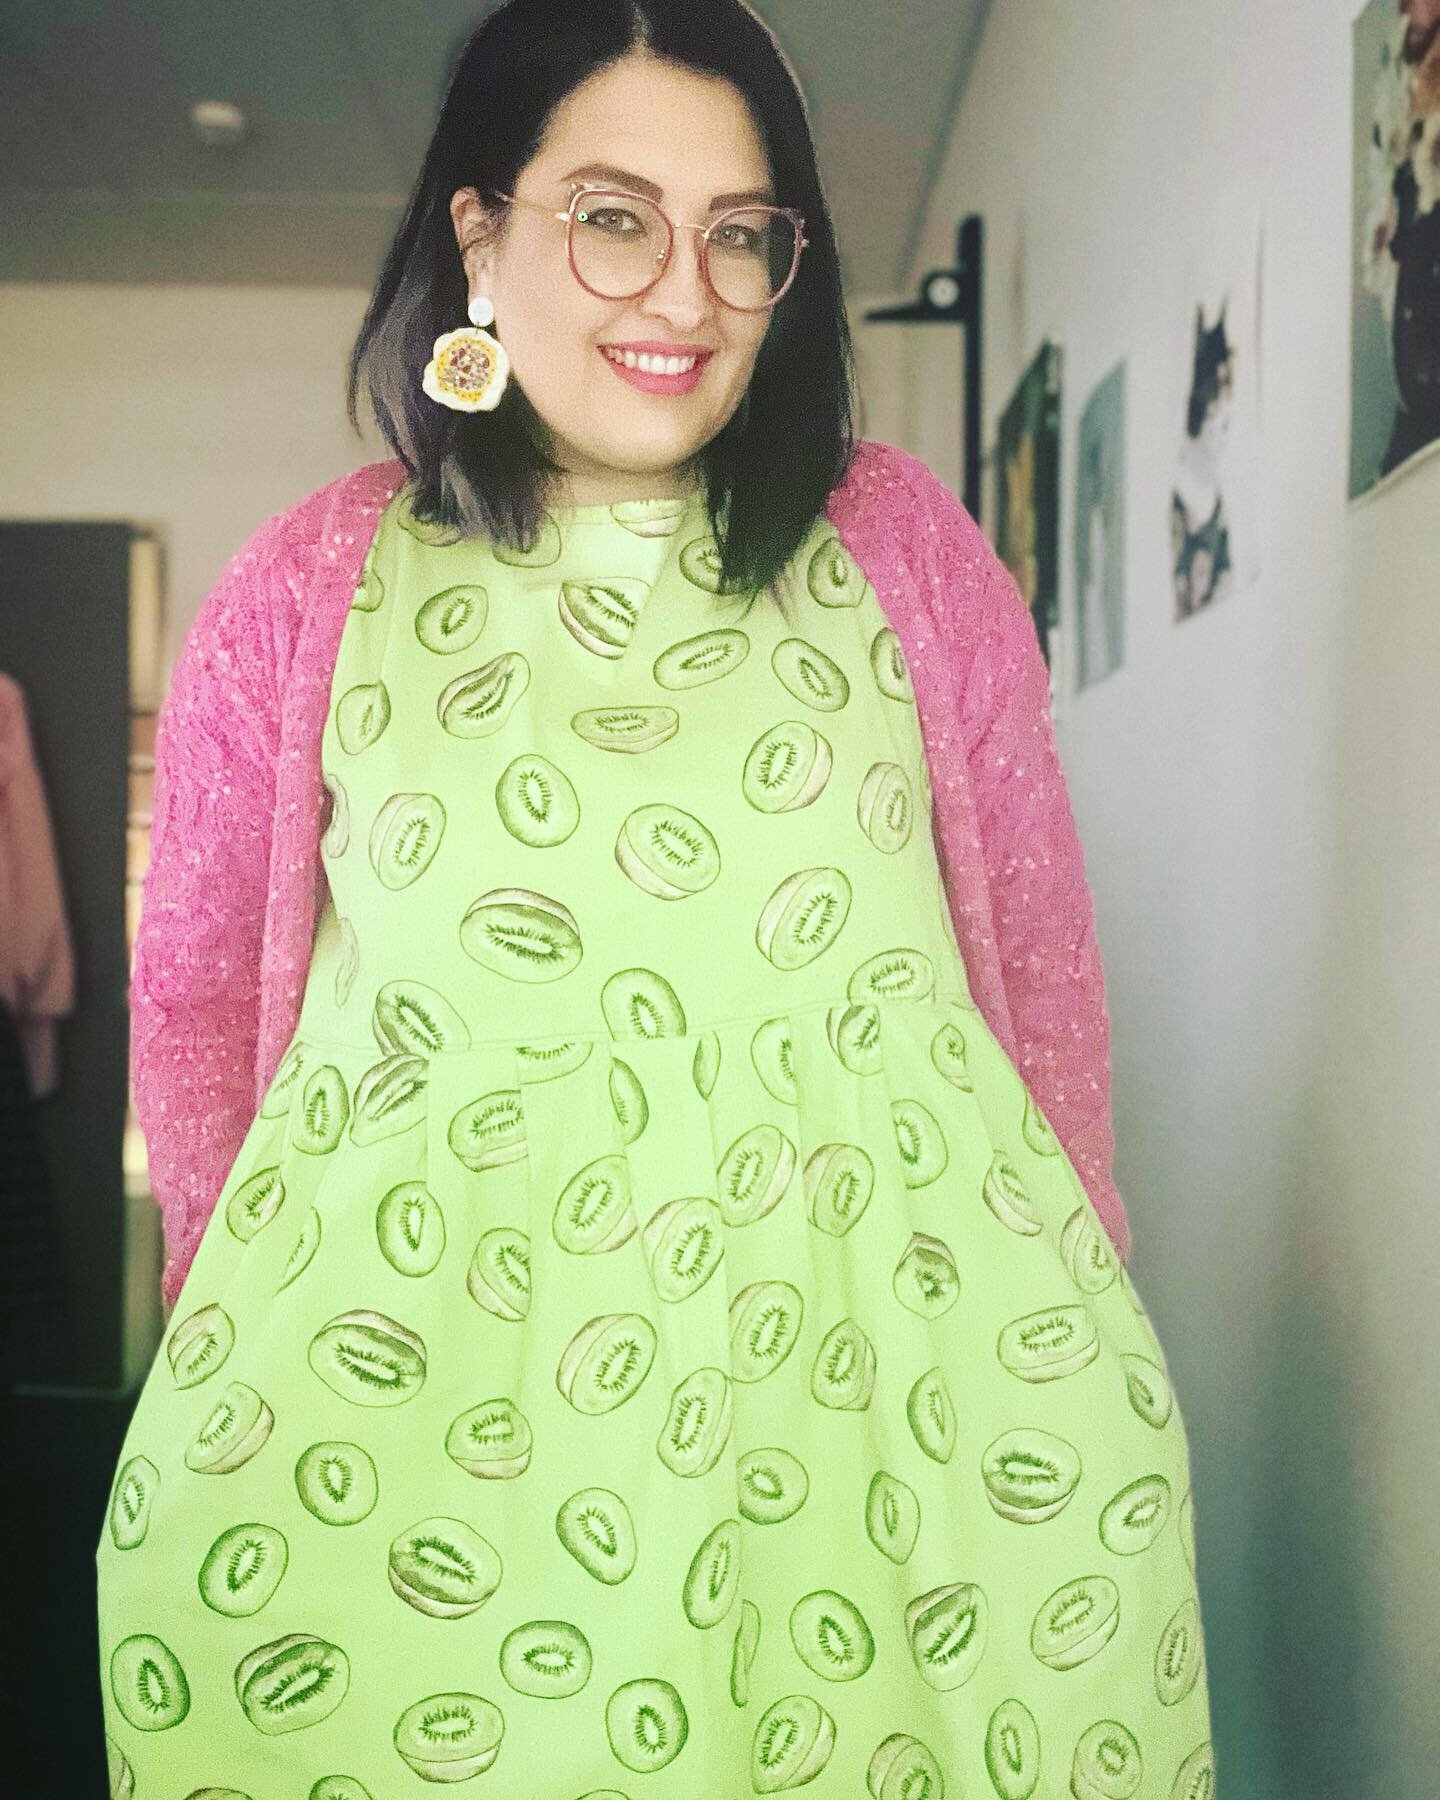 When you think vitamin C you probably think citrus, but there&rsquo;s actually more in #kiwifruits, especially the golden ones! 

Dress @nellywadeaustralia 
Earrings @fatmangocreative 

Image: me in a green dress with kiwi fruit print. My earrings ar